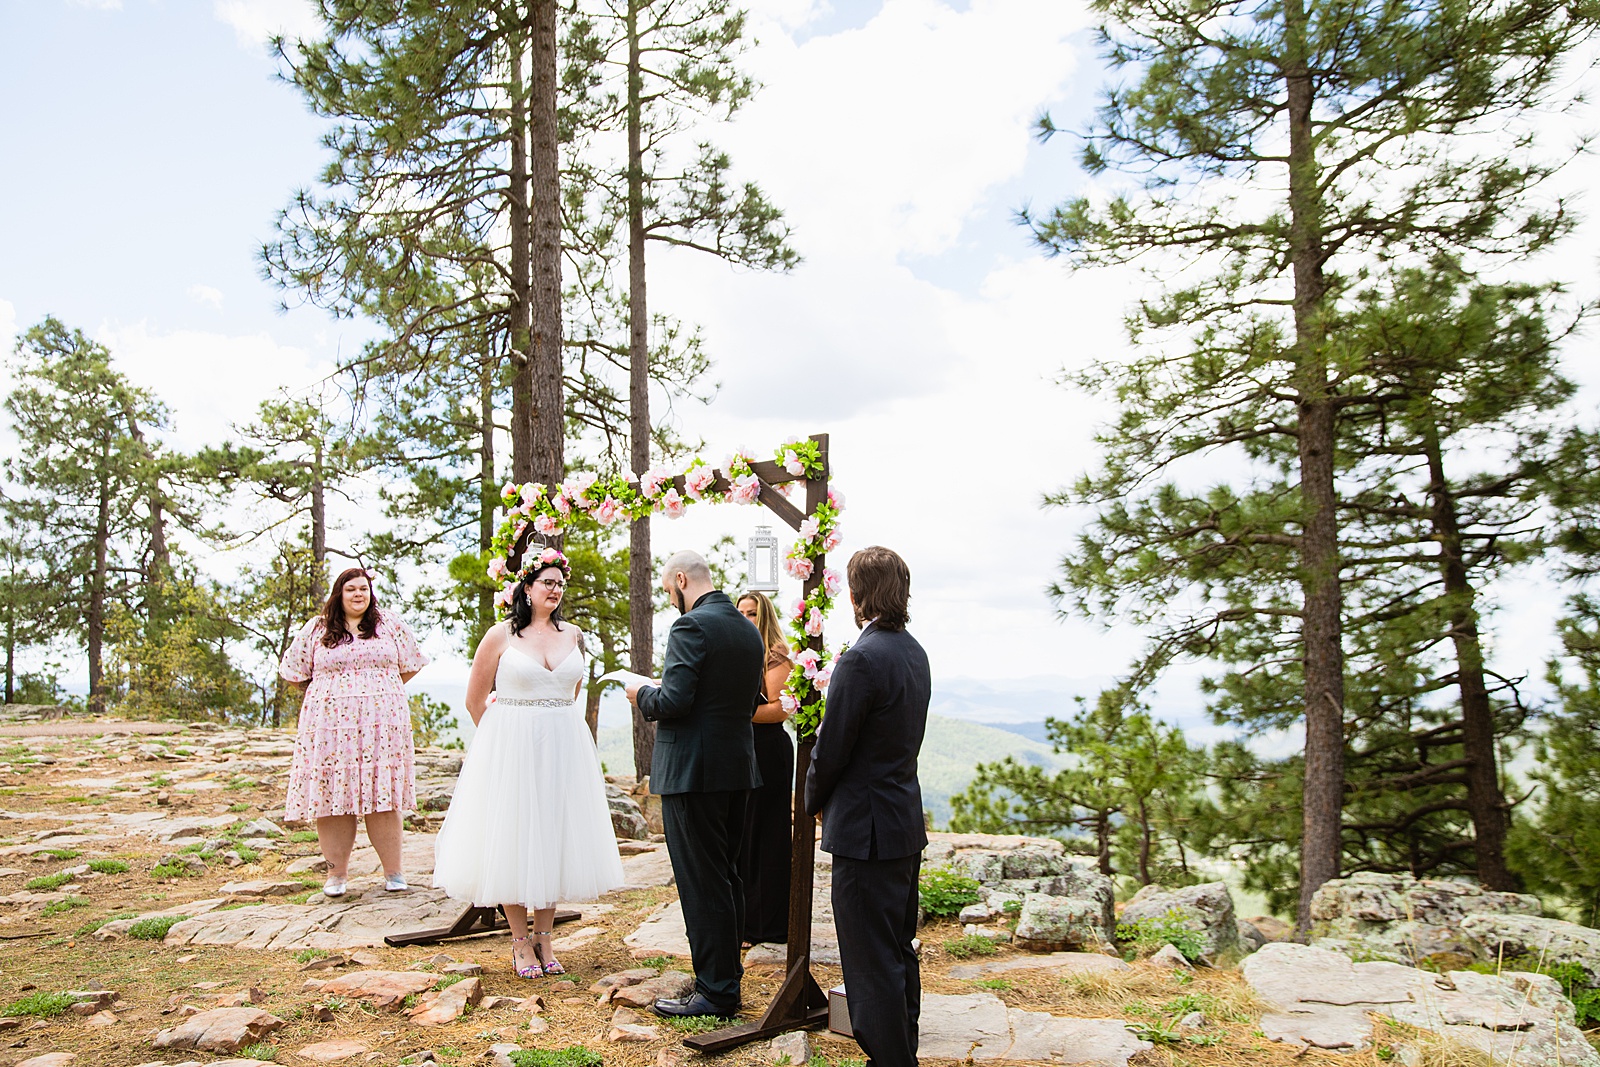 Bride & Groom exchange vows during their wedding ceremony at Mogollon Rim by Arizona elopement photographer PMA Photography.